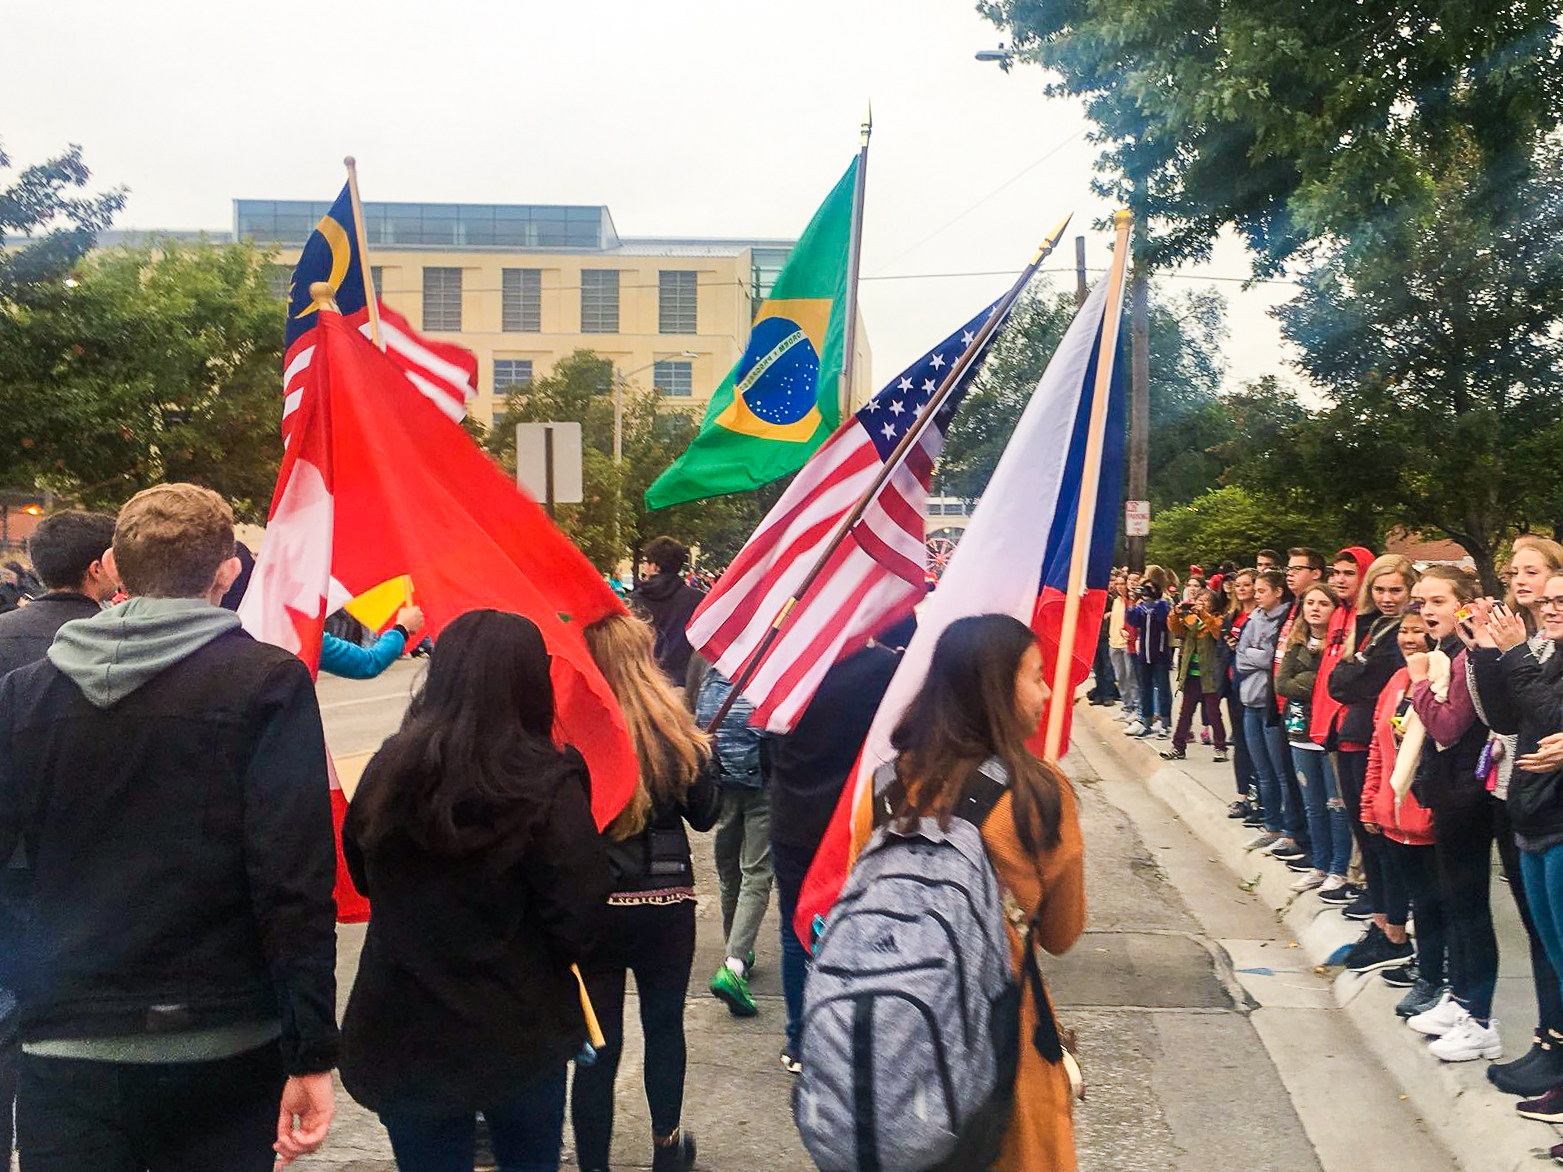 International students marching with their flags at Homecoming Parade